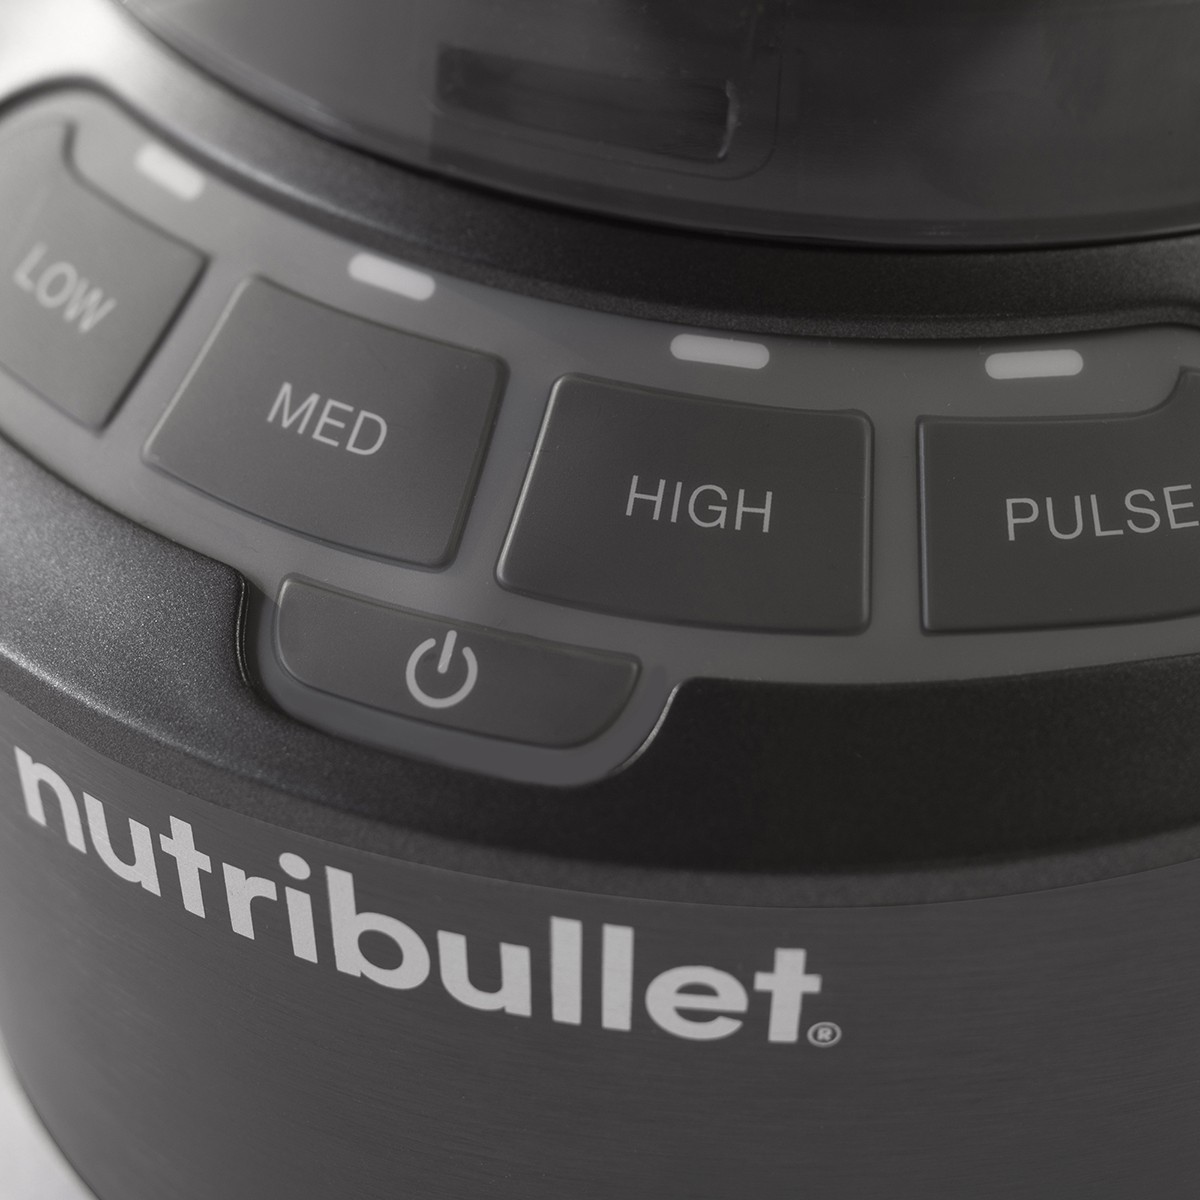 https://s3-assets.quenchessentials.com/media/images/products/nutribullet-nbf50400-blender-controls.jpg